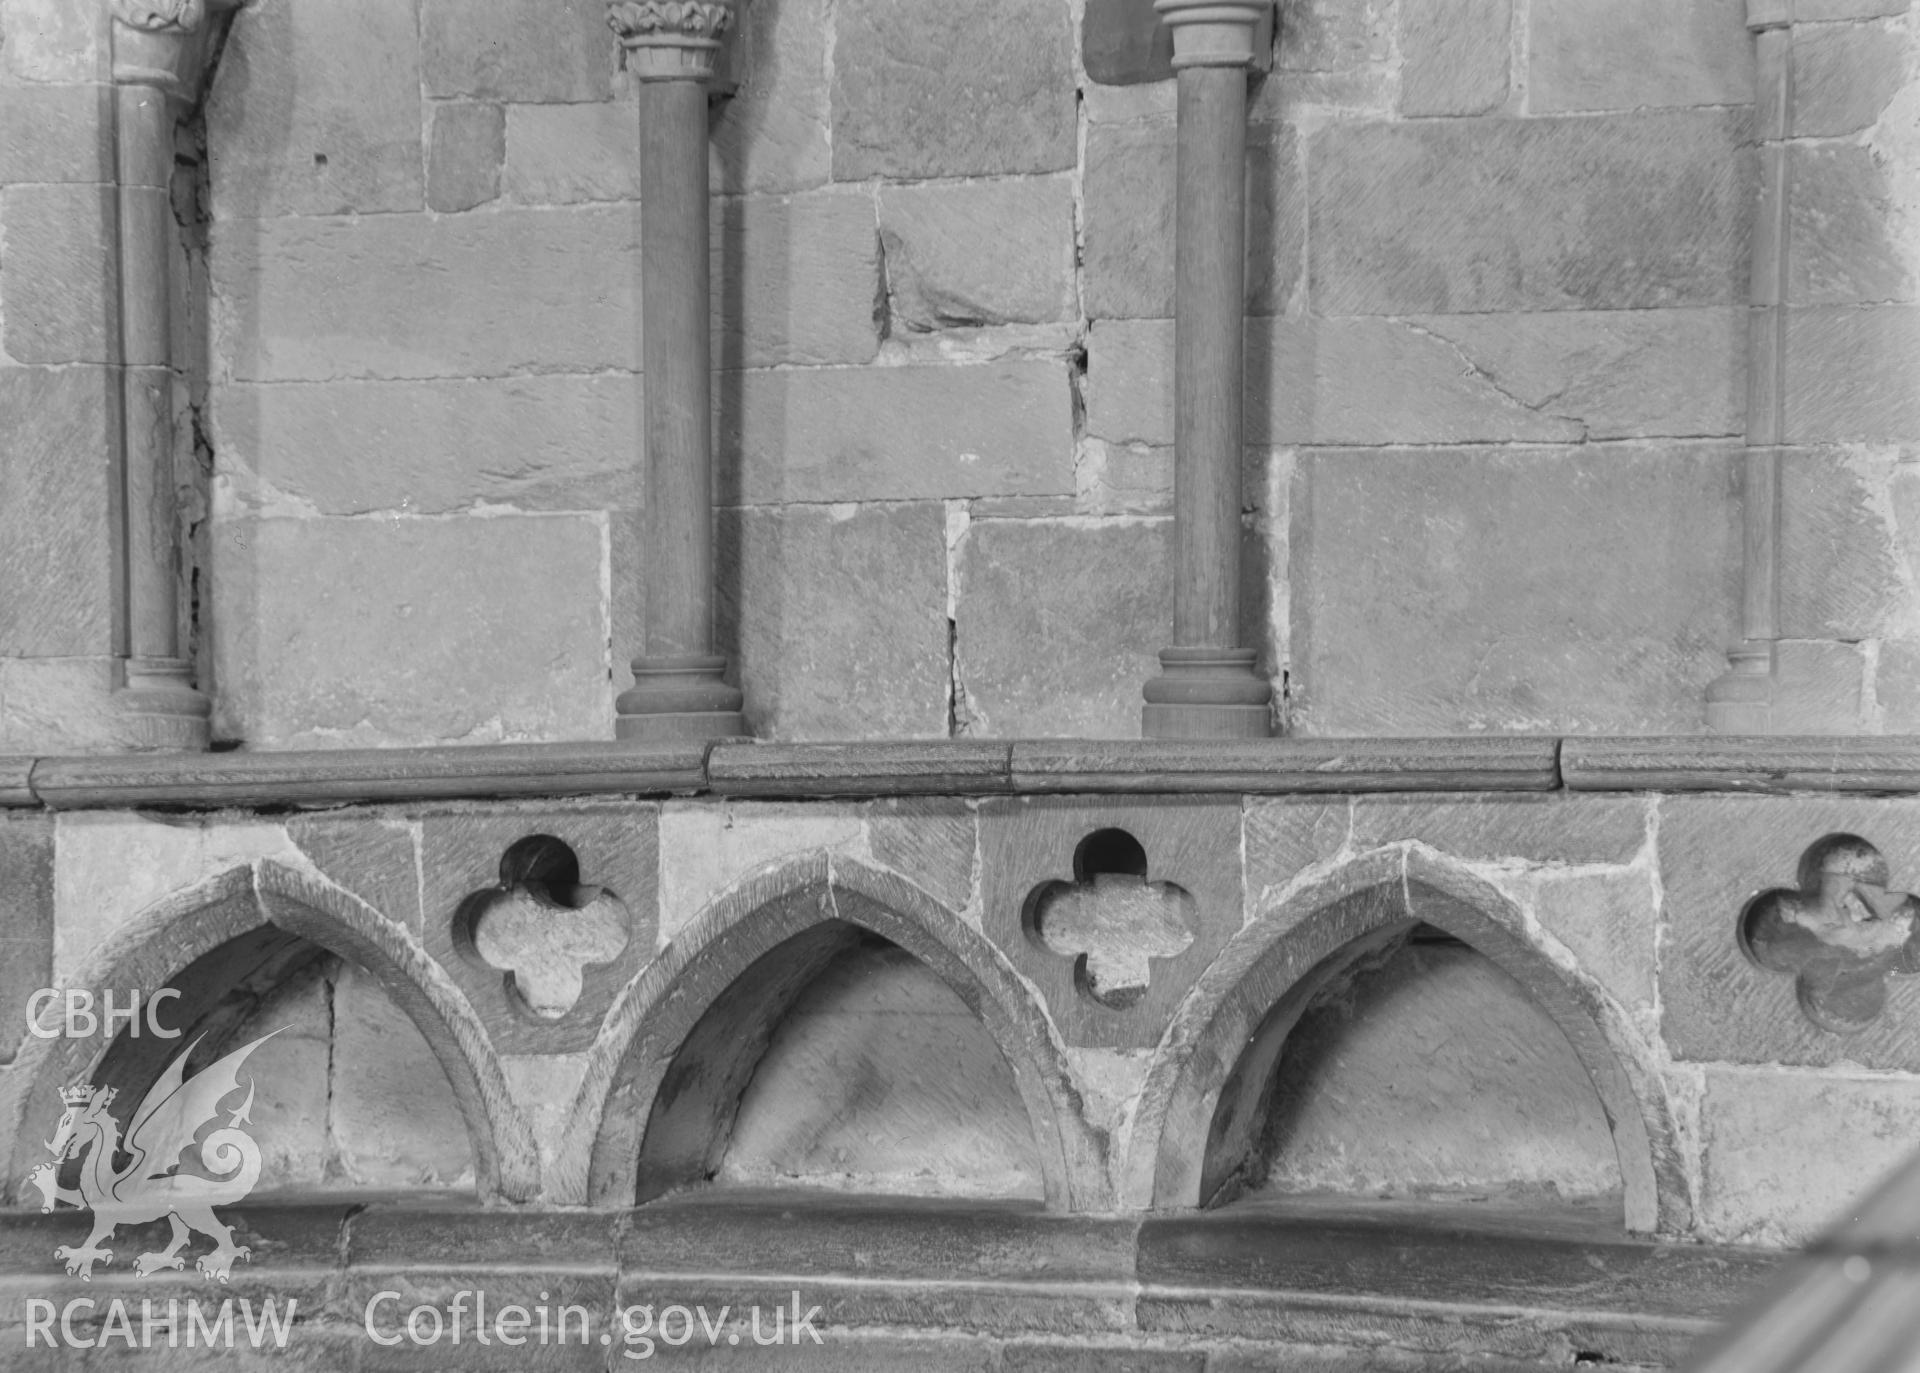 Digital copy of a black and white acetate negative showing detailed interior view at St. David's Cathedral, taken by E.W. Lovegrove, July 1936